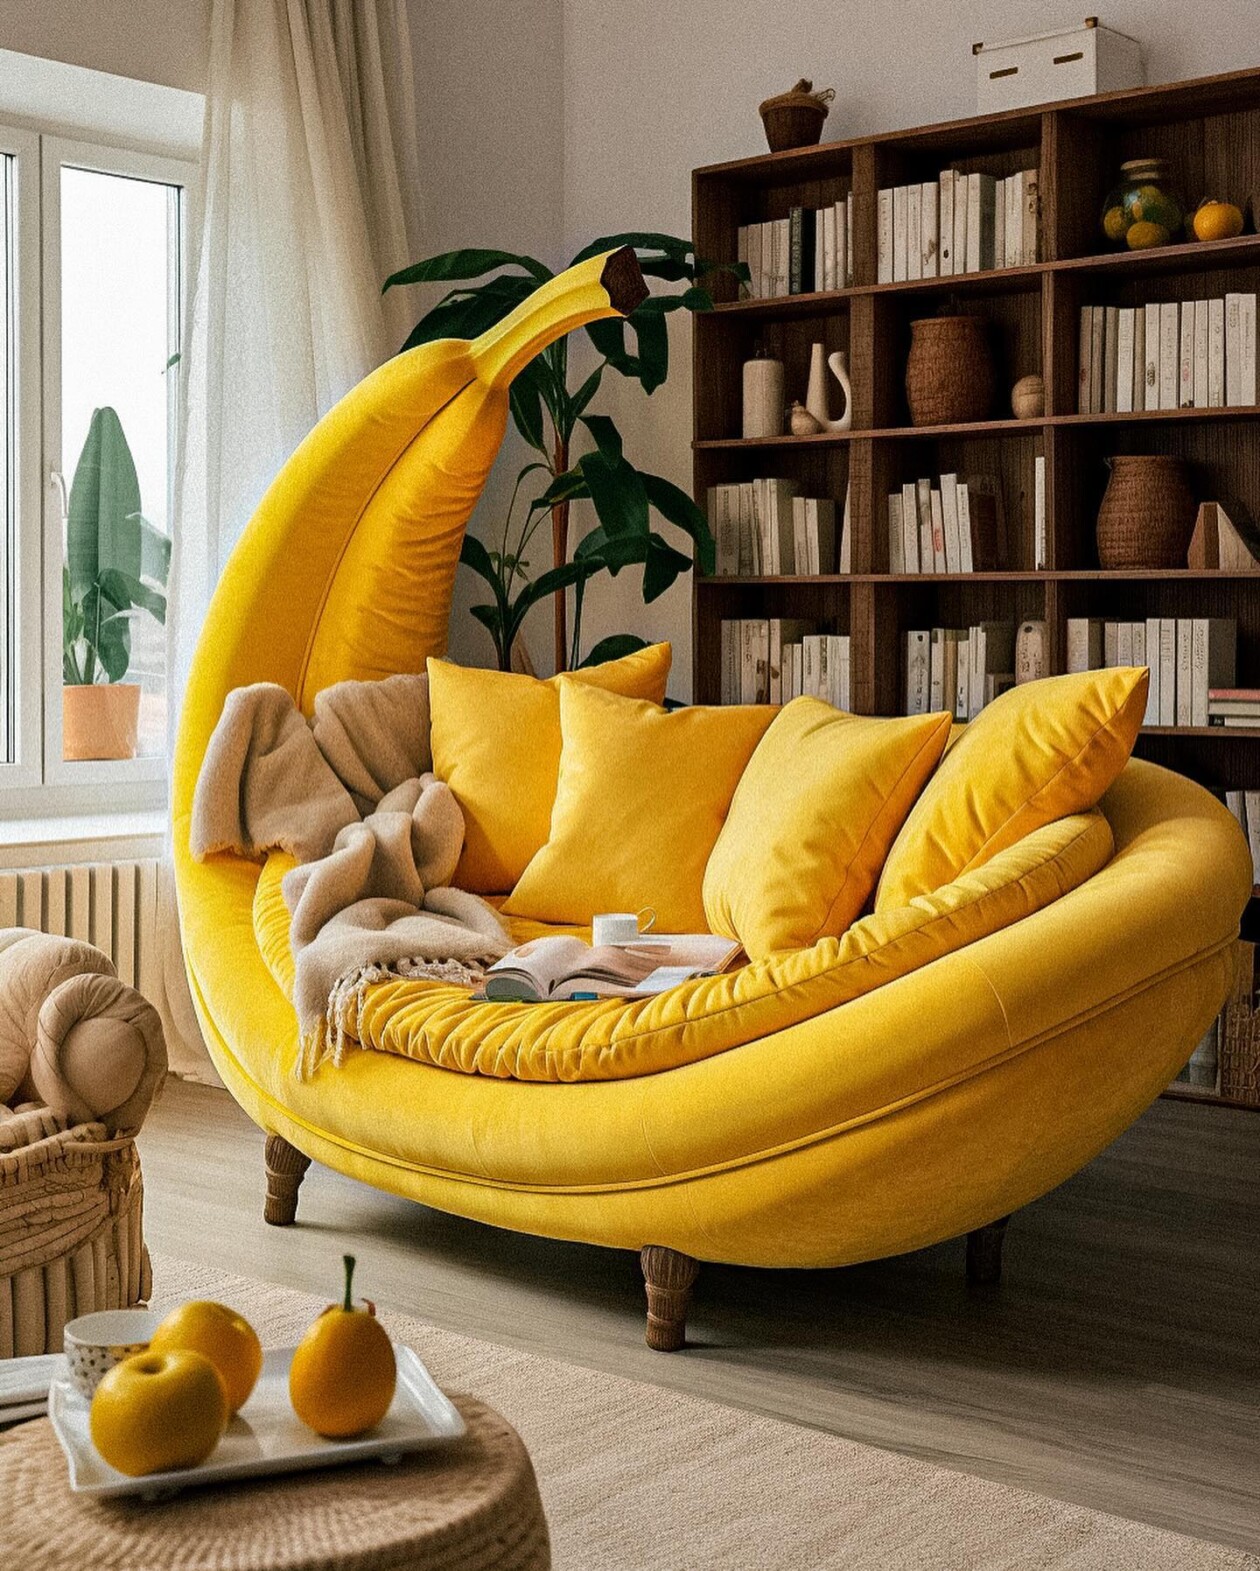 Gorgeous And Amusing Fruit Inspired Lounge Chairs By Dina Dennaoui (8)